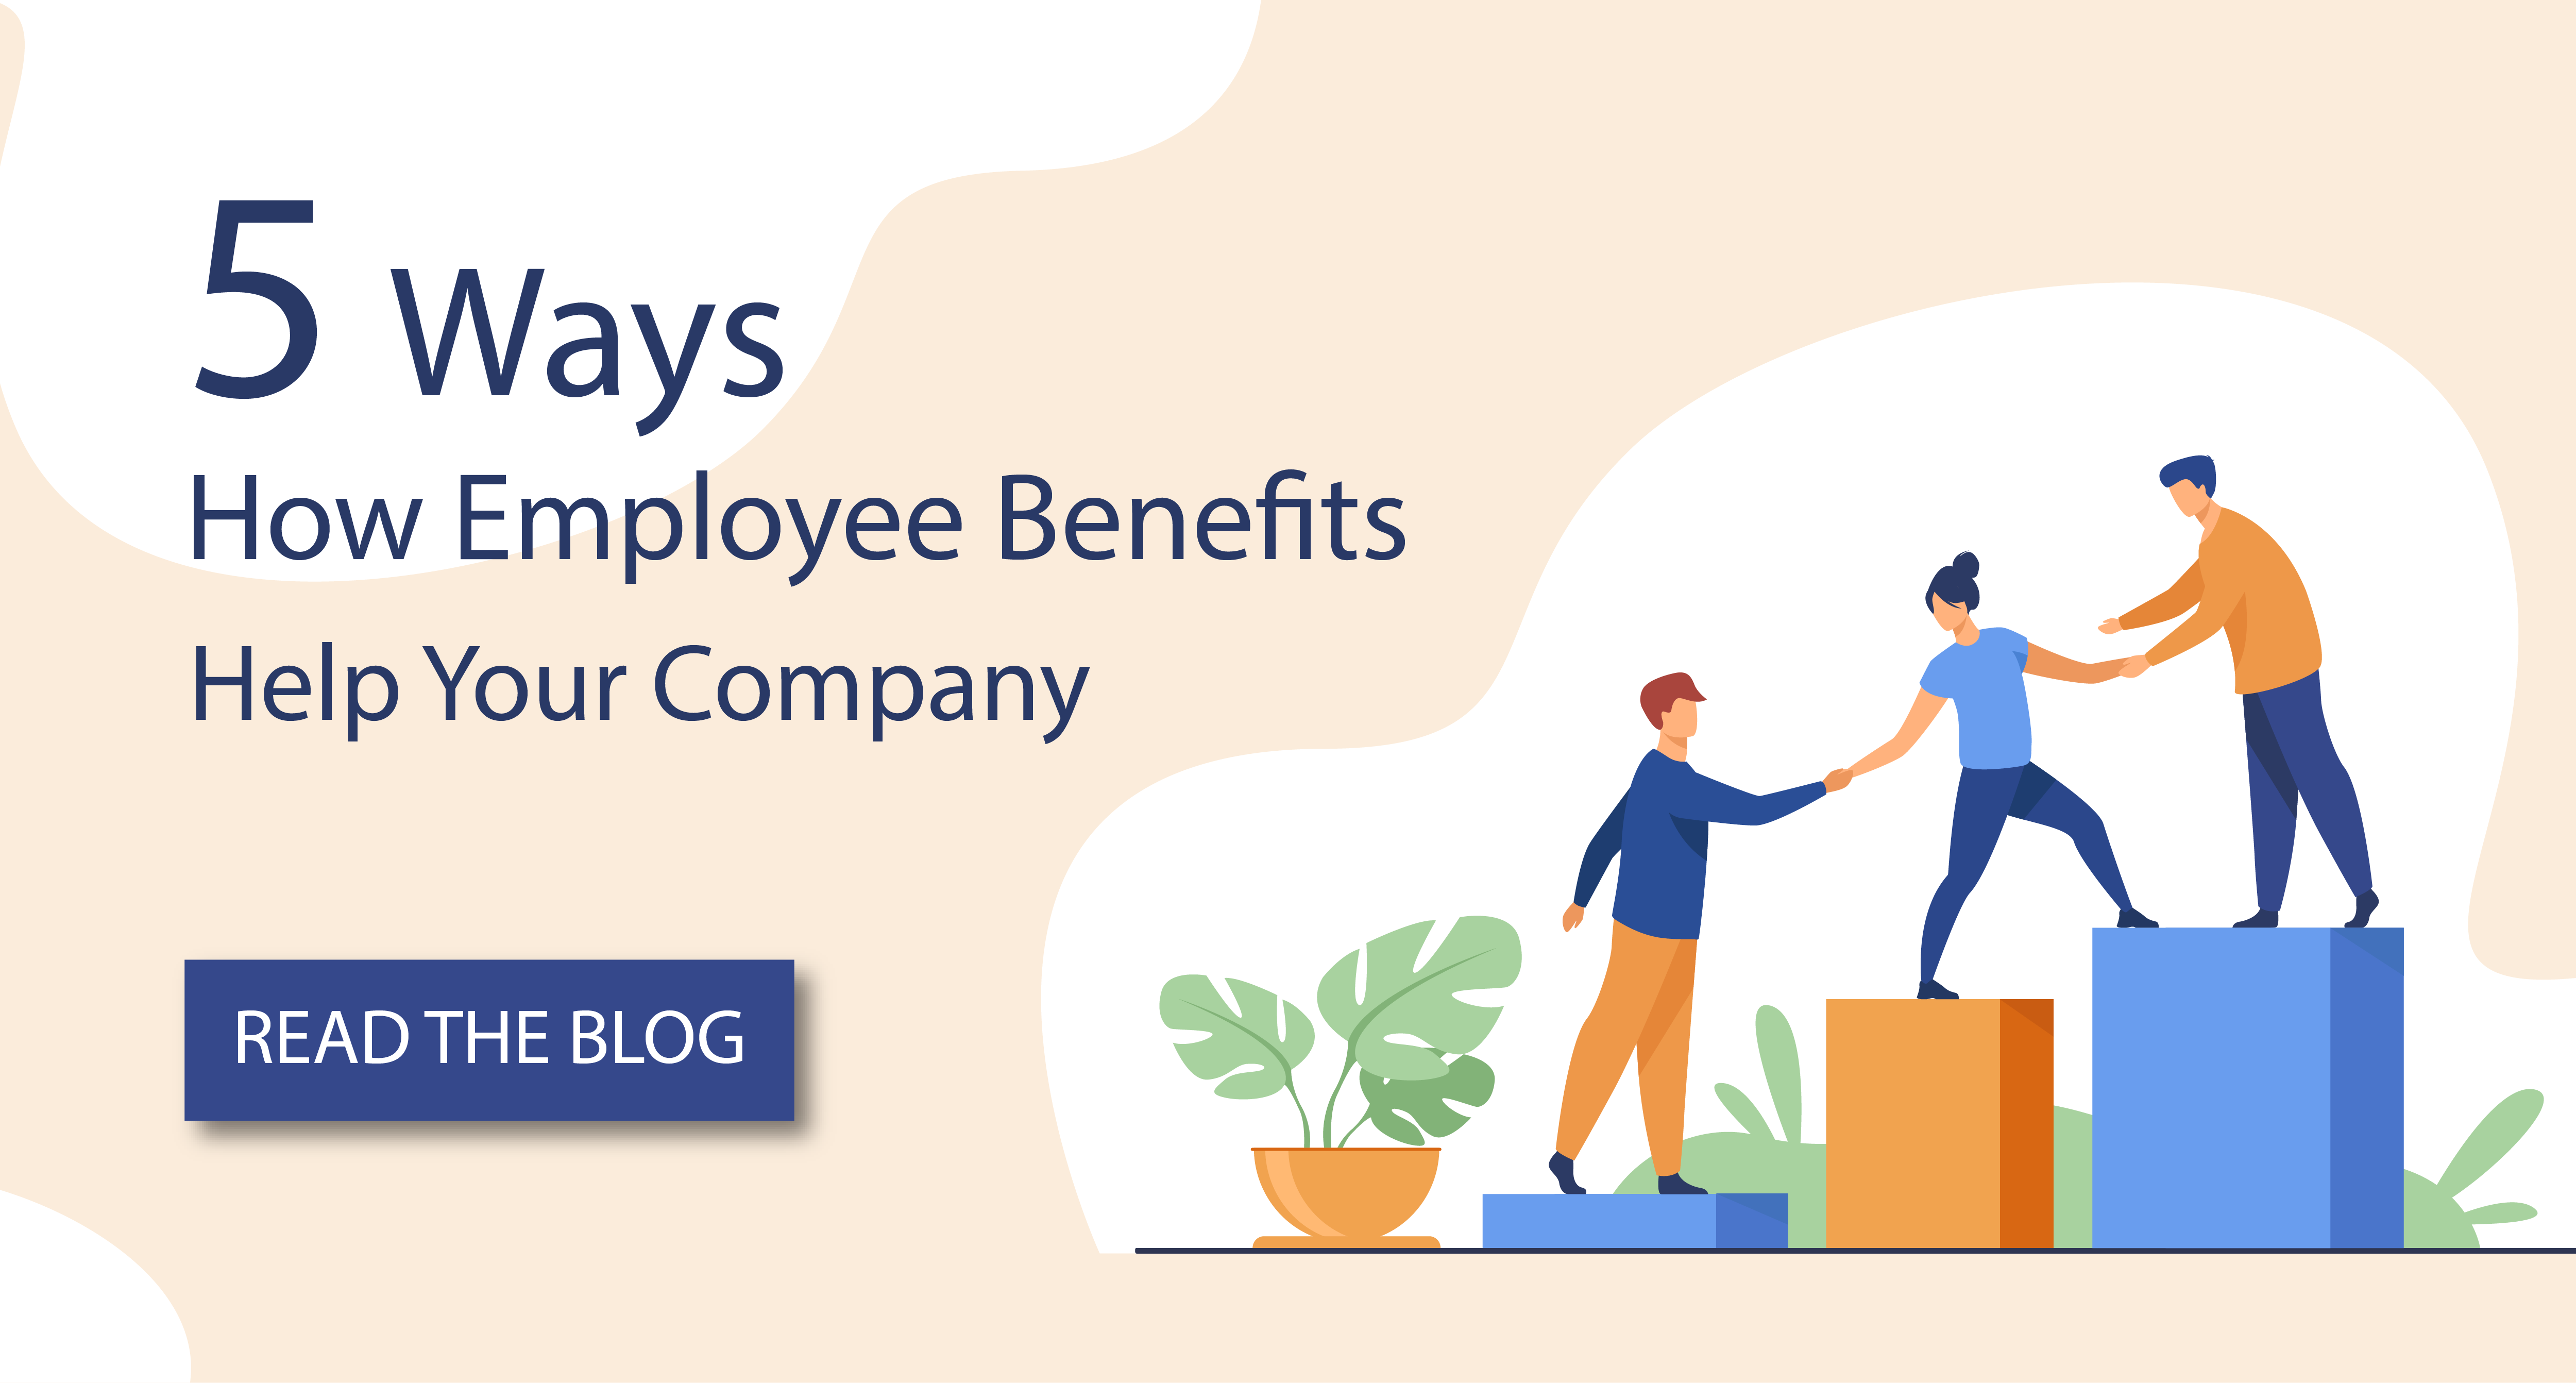 5 Ways How Employee Benefit helps Your Company